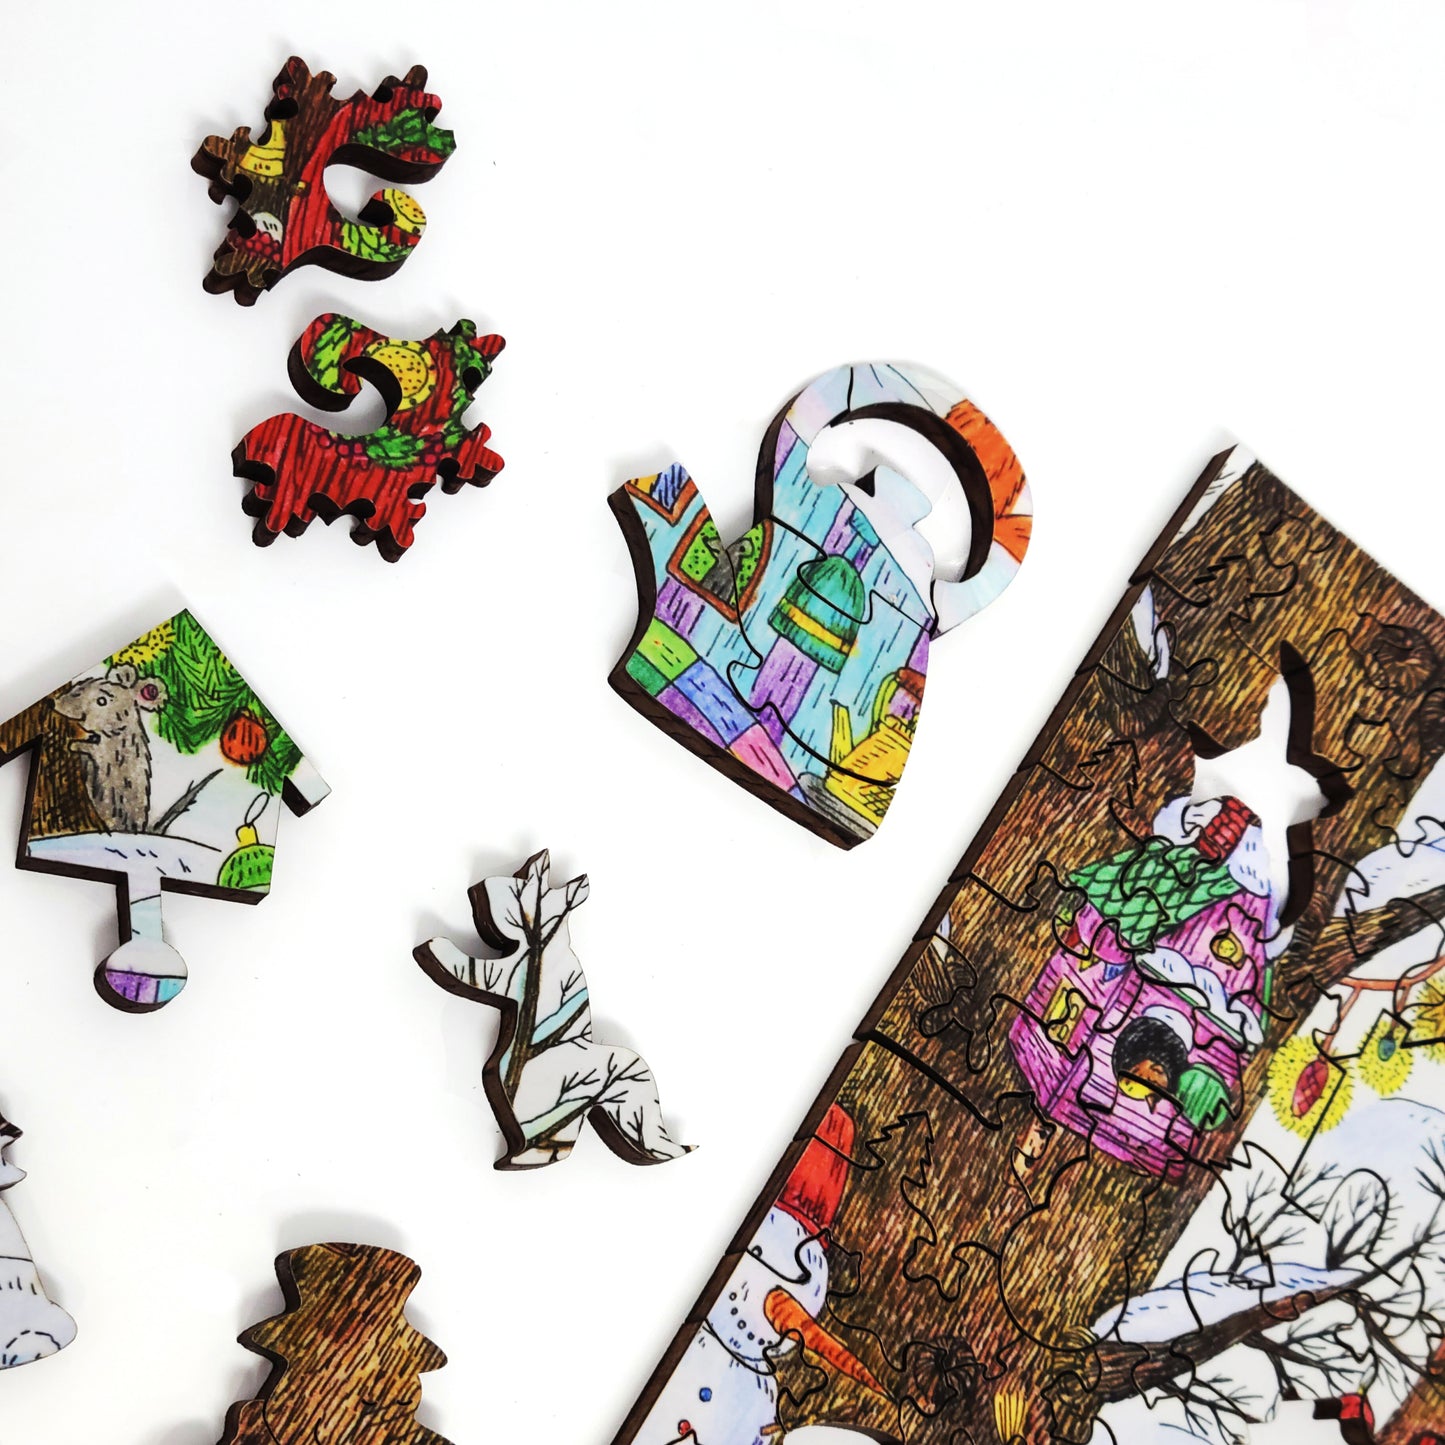 Wooden Jigsaw Puzzle with Uniquely Shaped Pieces for Adults - 434 Pieces - Fairy Forest. Winter